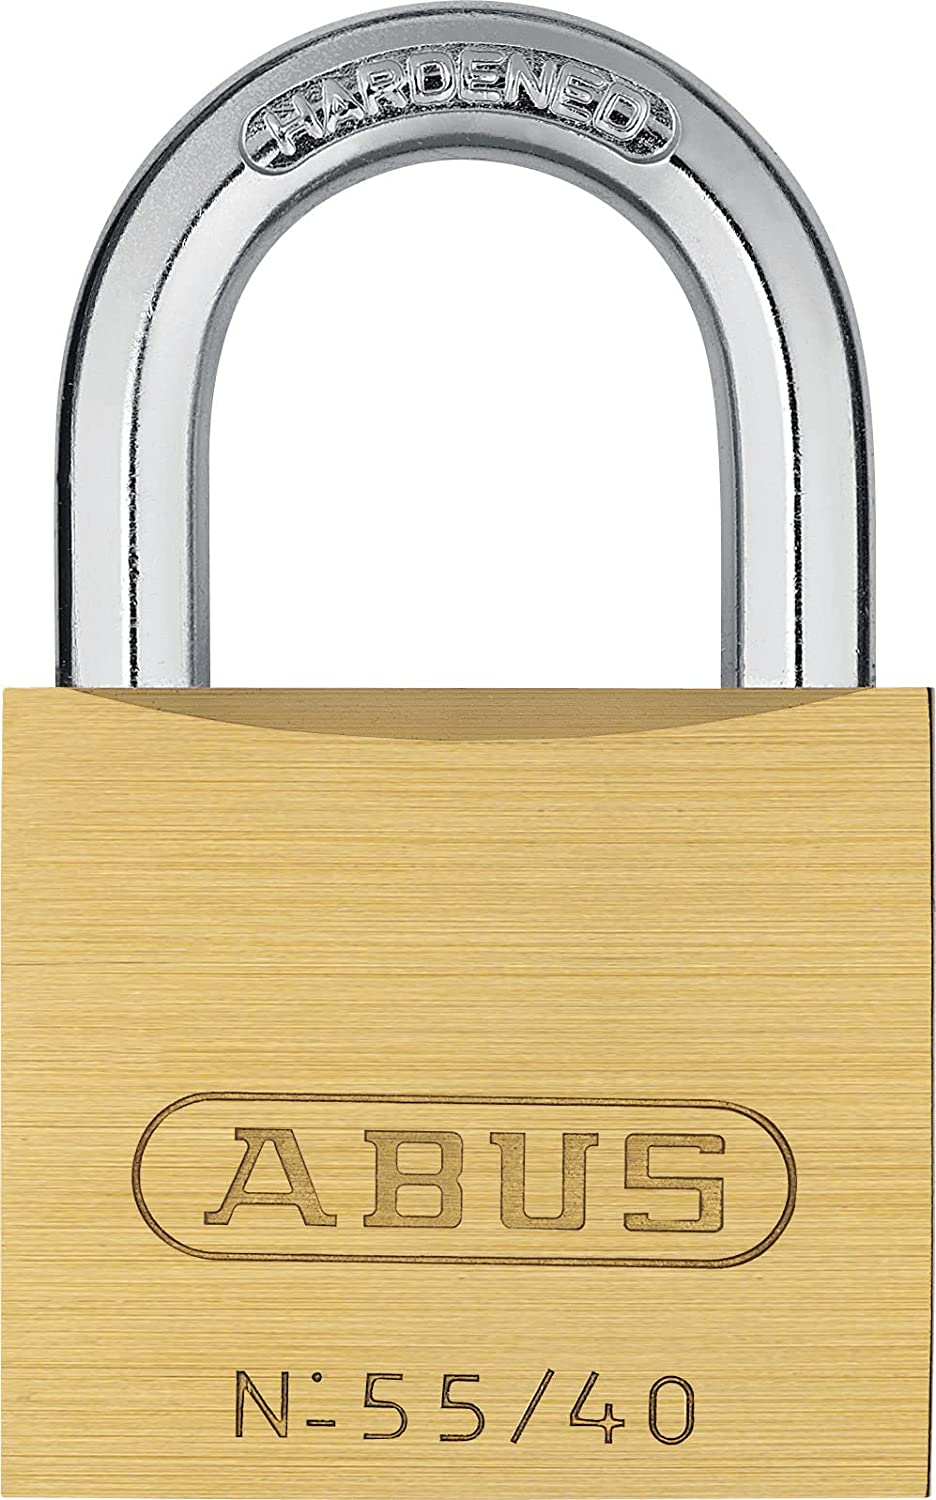 ABUS 55/40 Solid Brass Padlock with Hardened Steel [...]